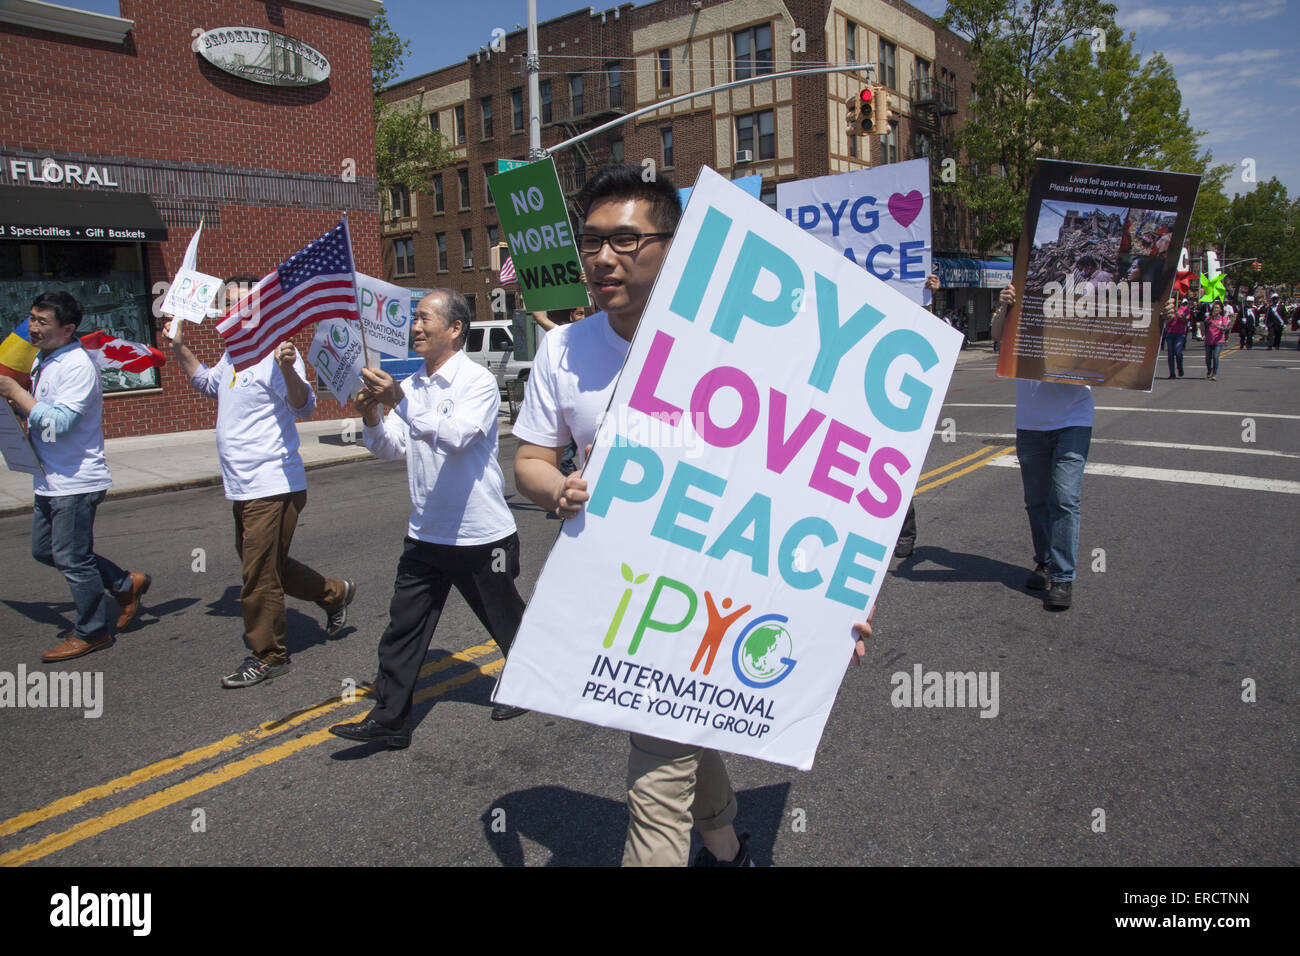 International Peace Youth Group march in the Memorial Day Parade in Bay Ridge Brooklyn advocating 'No more War.' Stock Photo